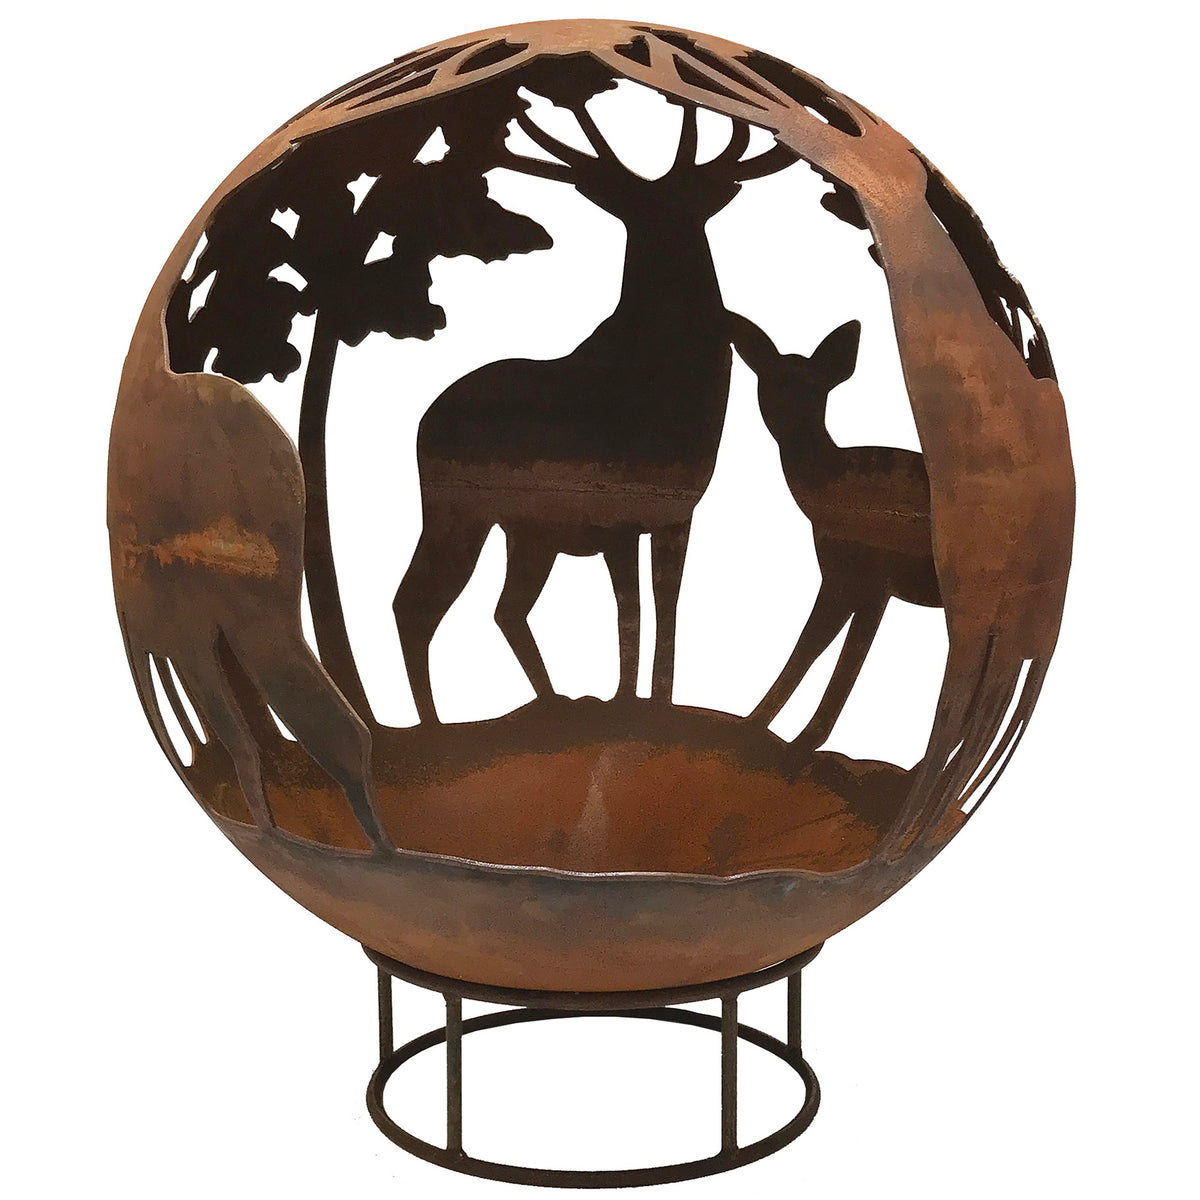 Garden Fire Ball 70cm Stag Design with Rust Finish